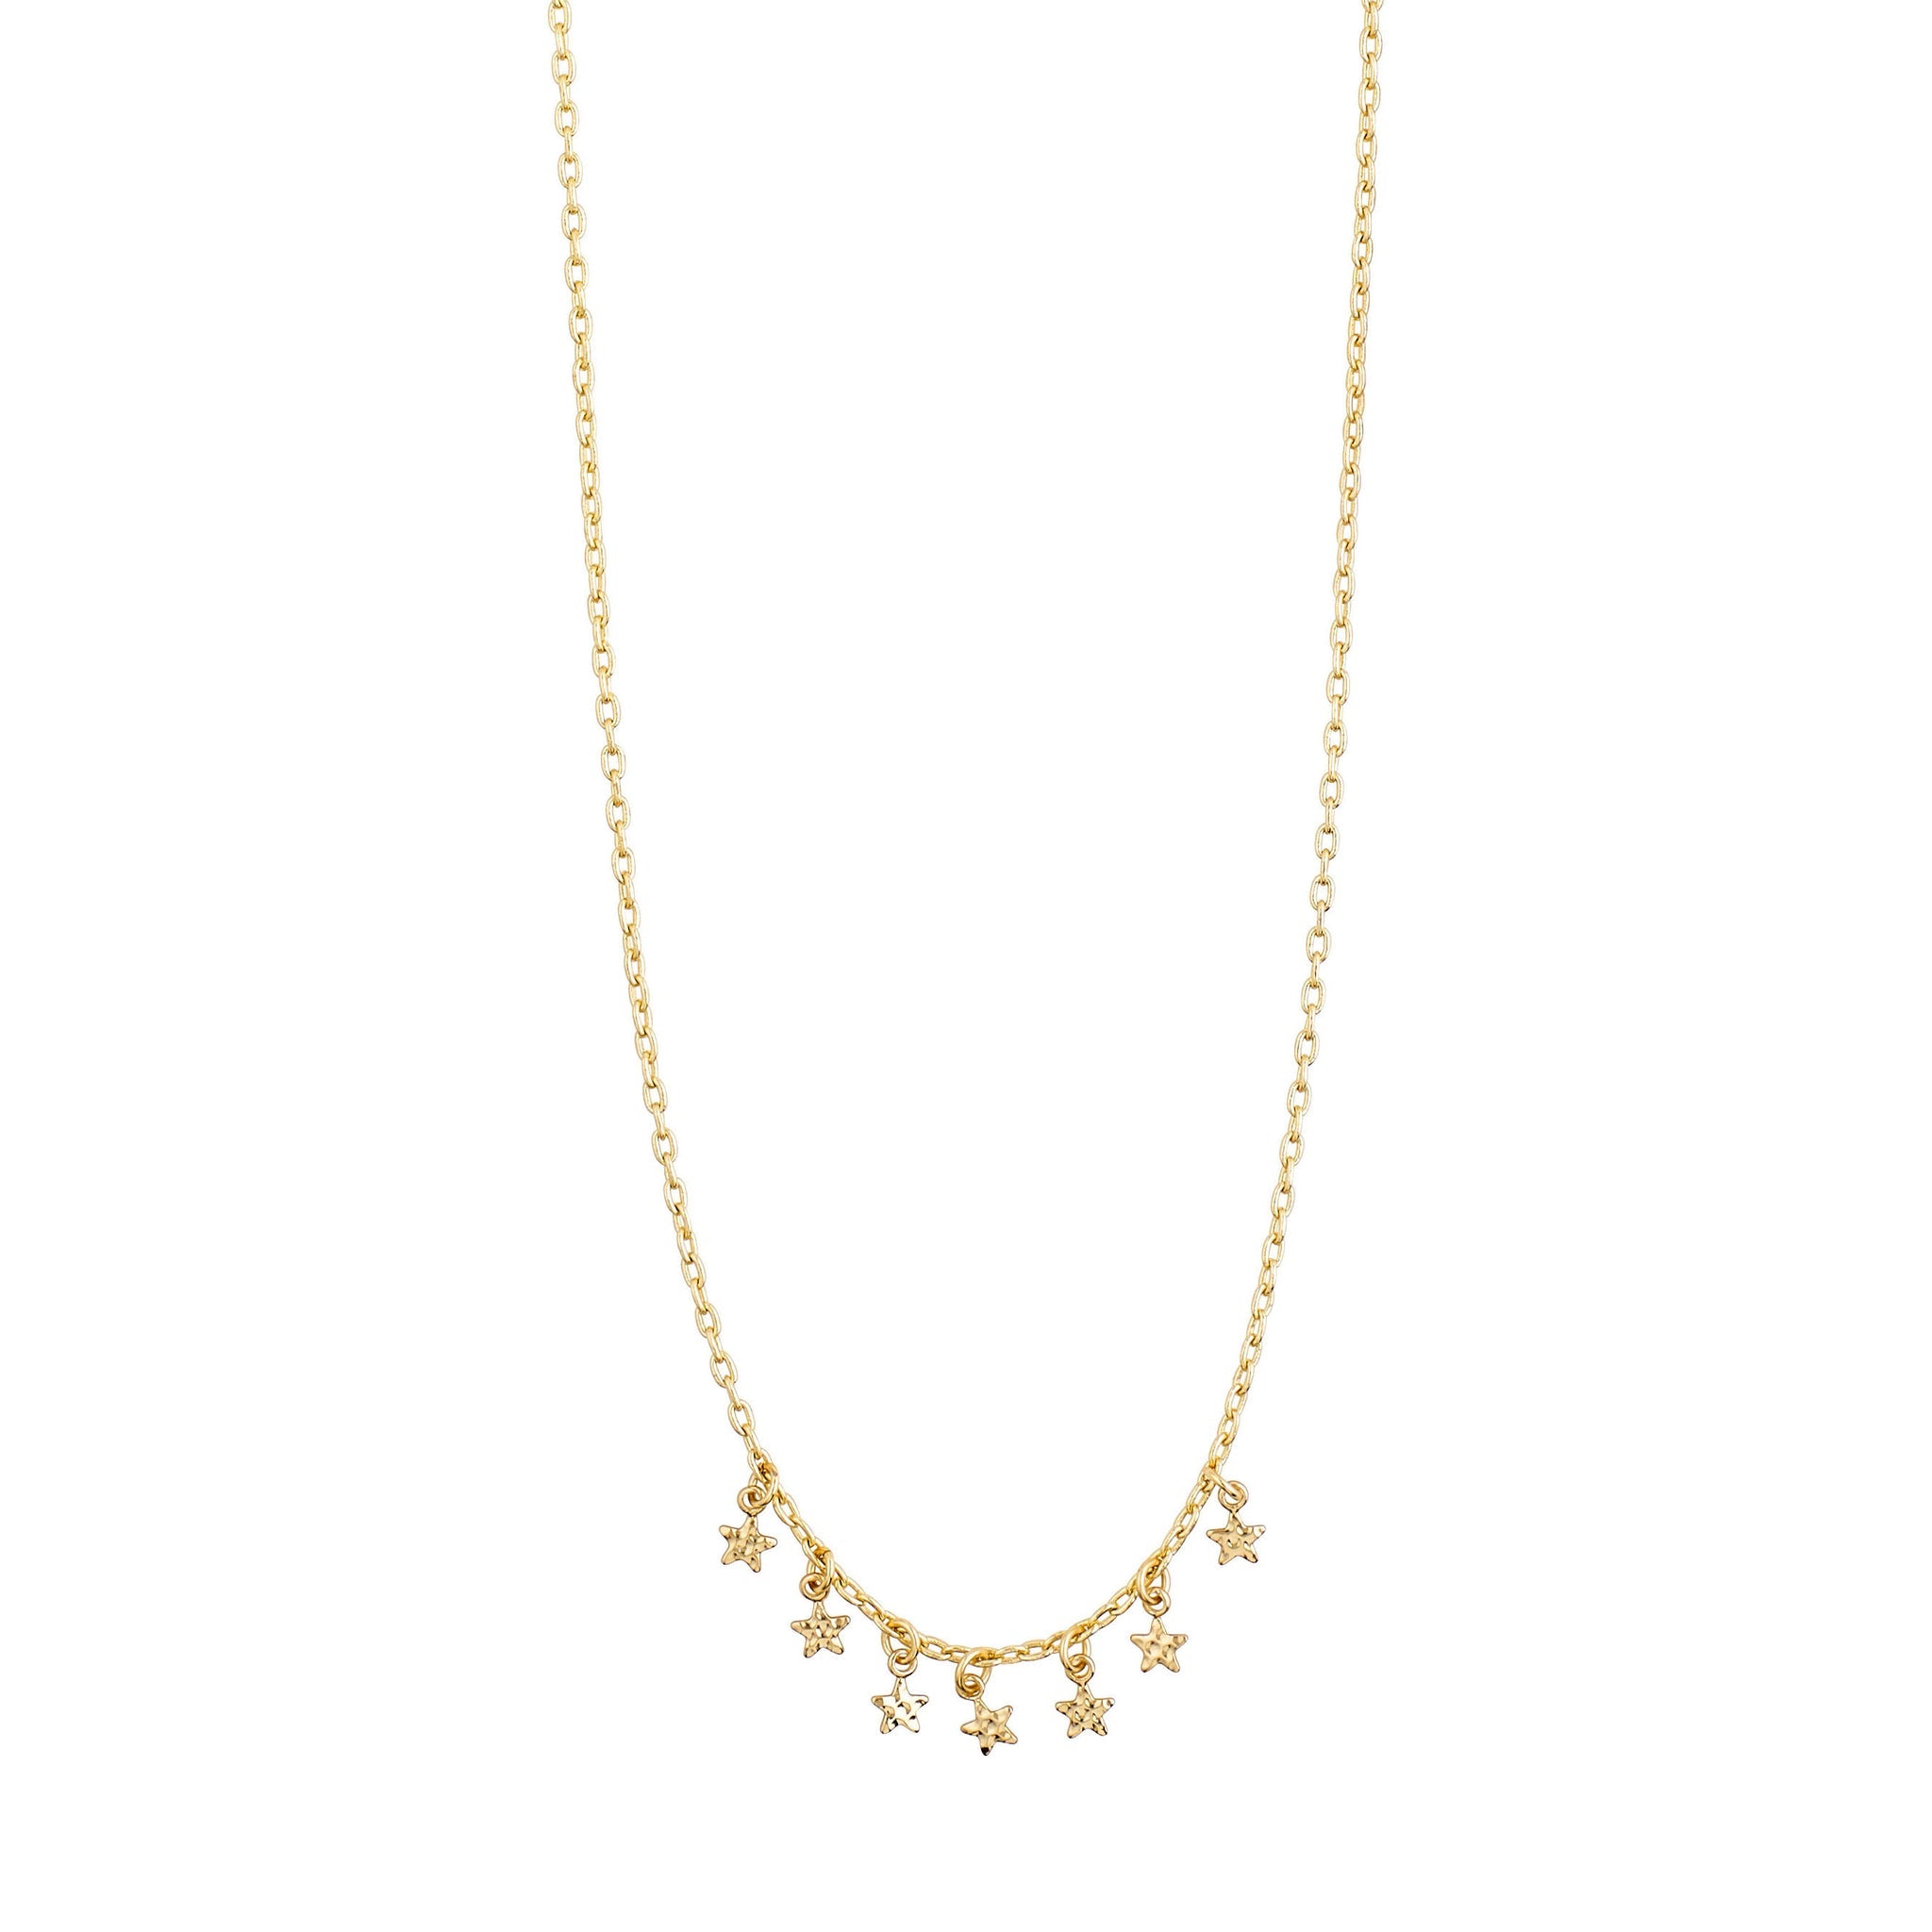 Regina Necklace - Gold Plated